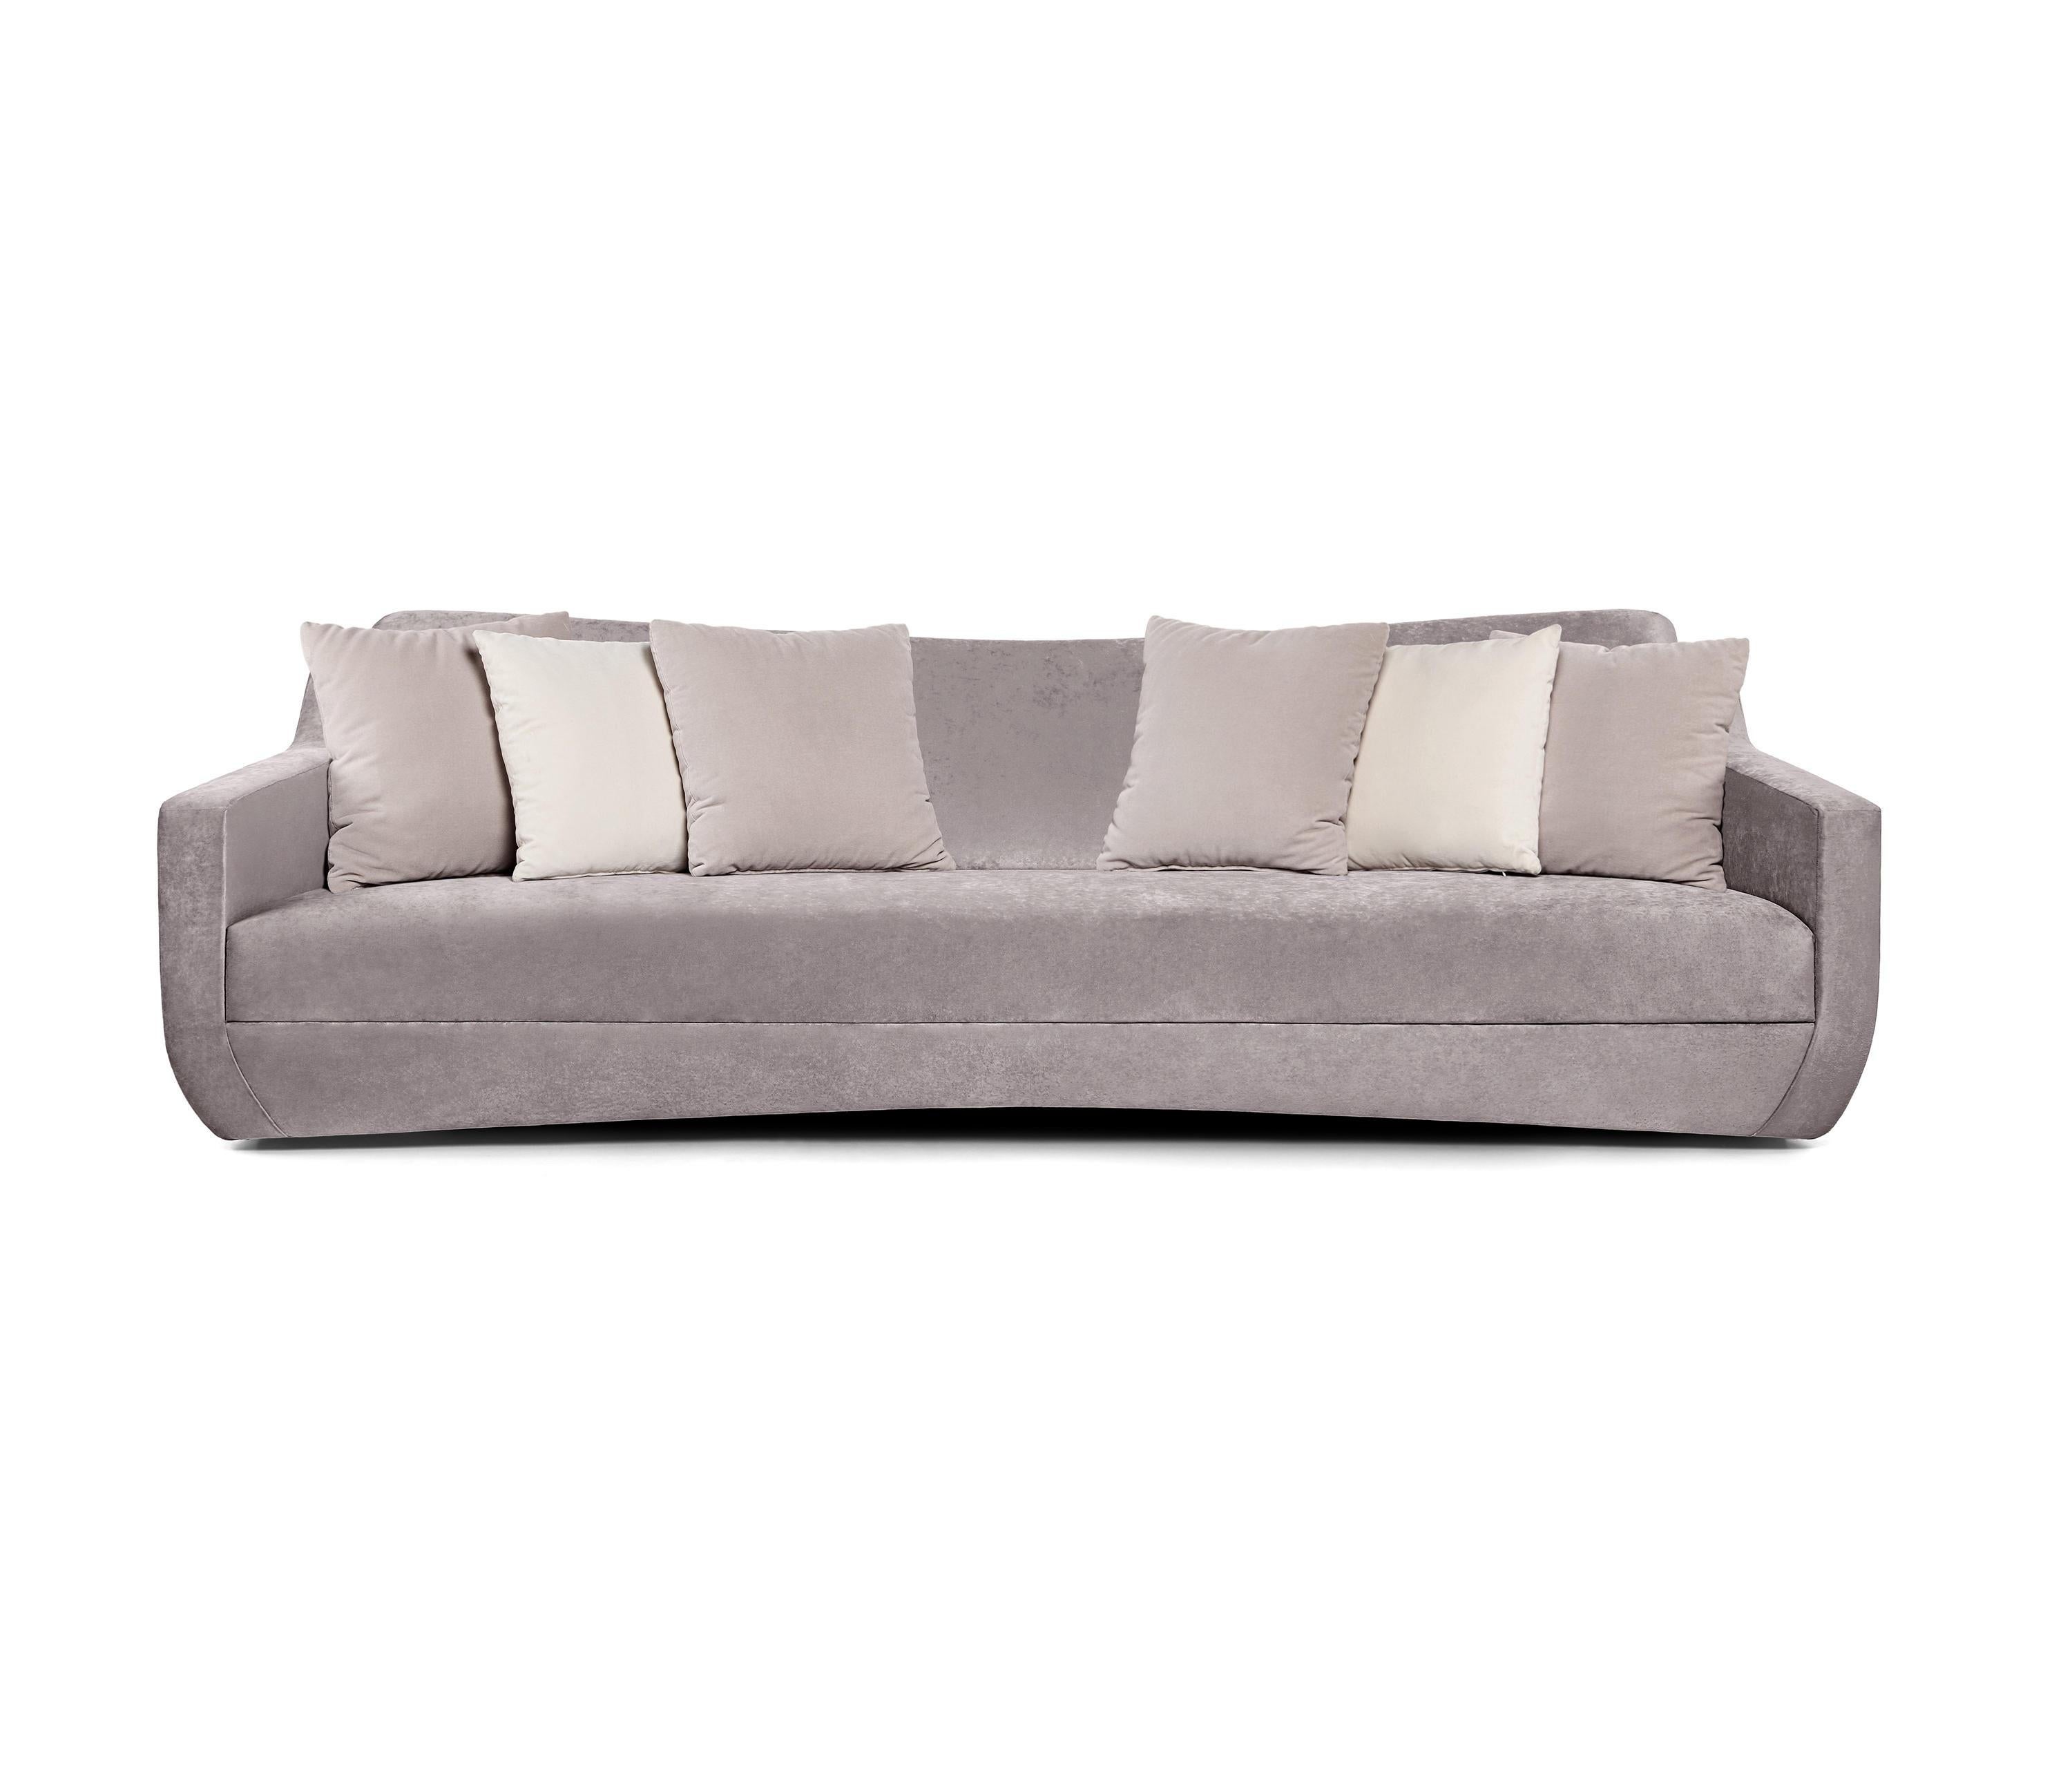 Contemporary Sculptural Sofa with Discreet Seaming For Sale 4